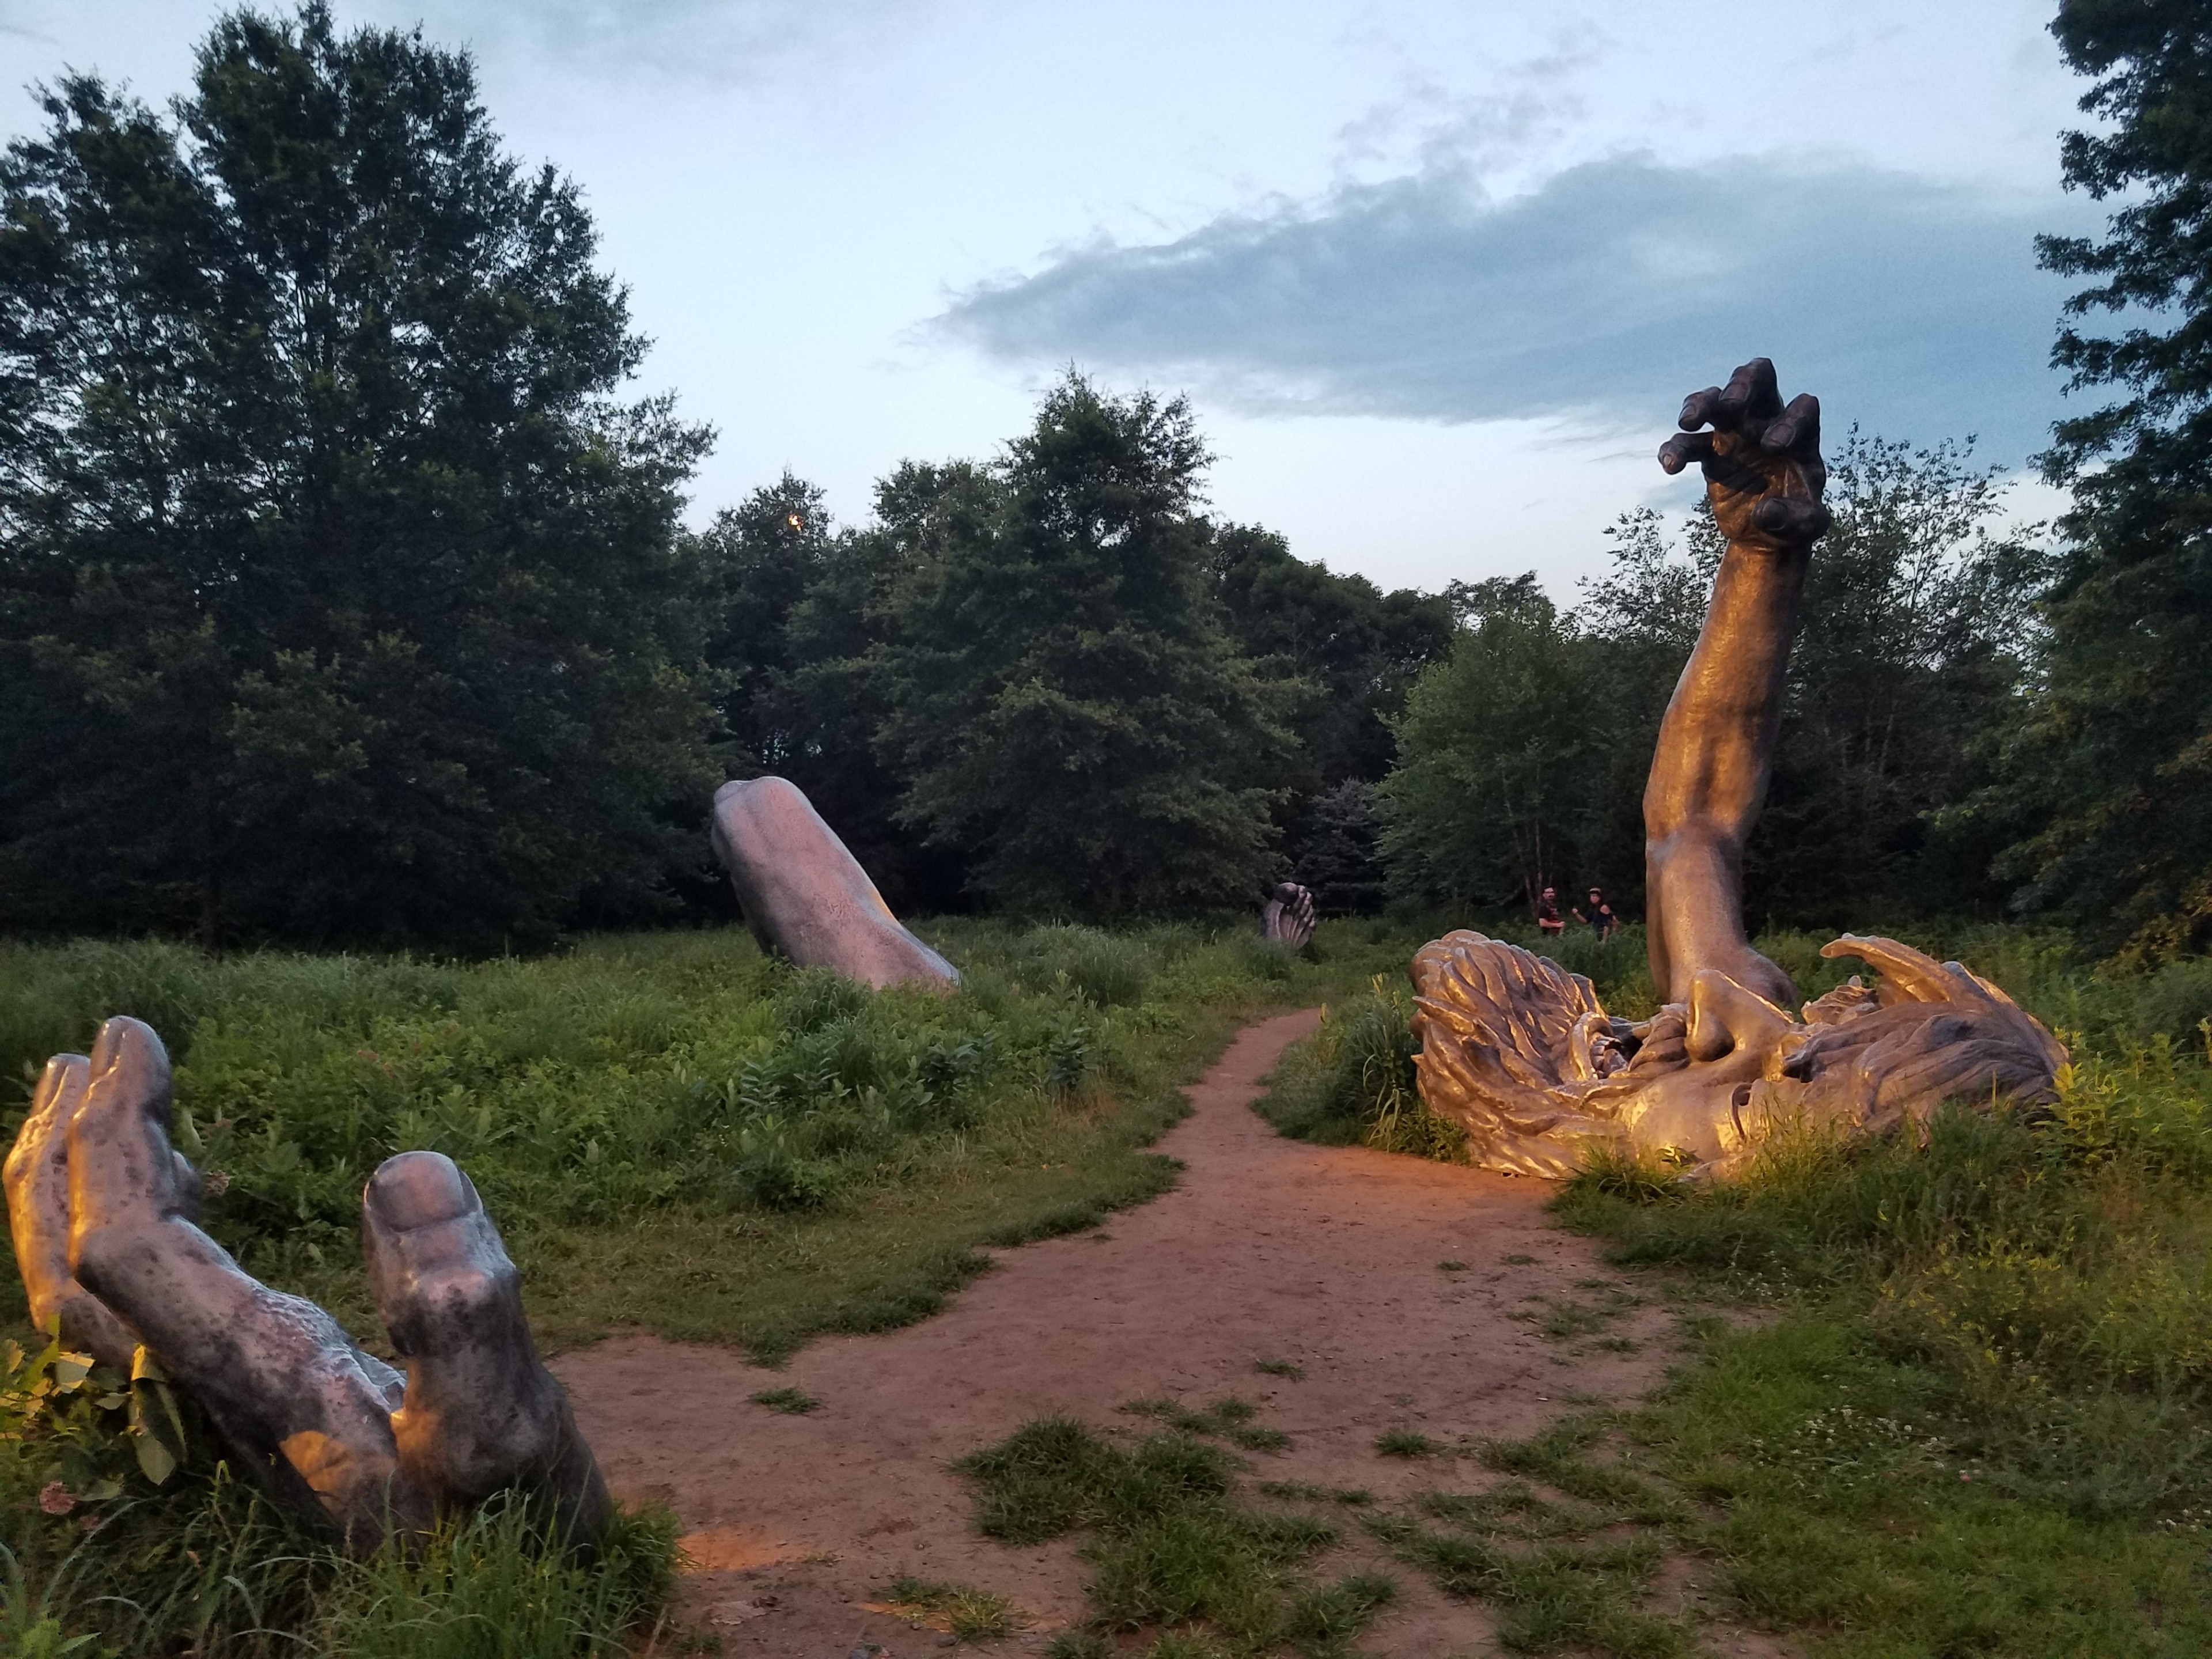 Of course my favorite sculpture is even more magical at dusk! #Culture